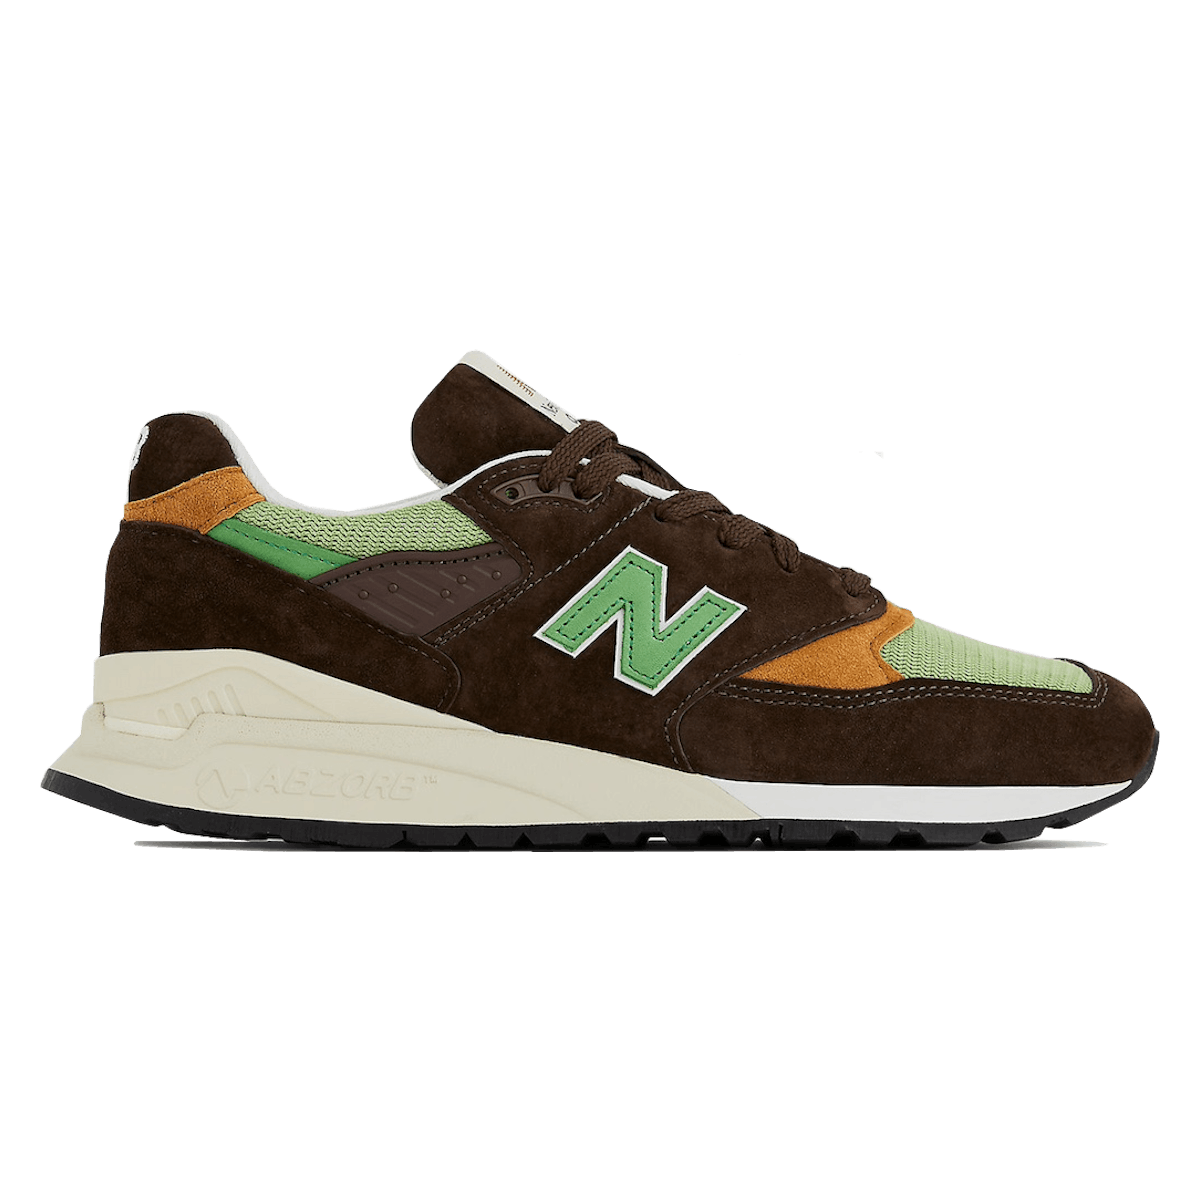 New Balance 998 Made in USA "Rich Earth"